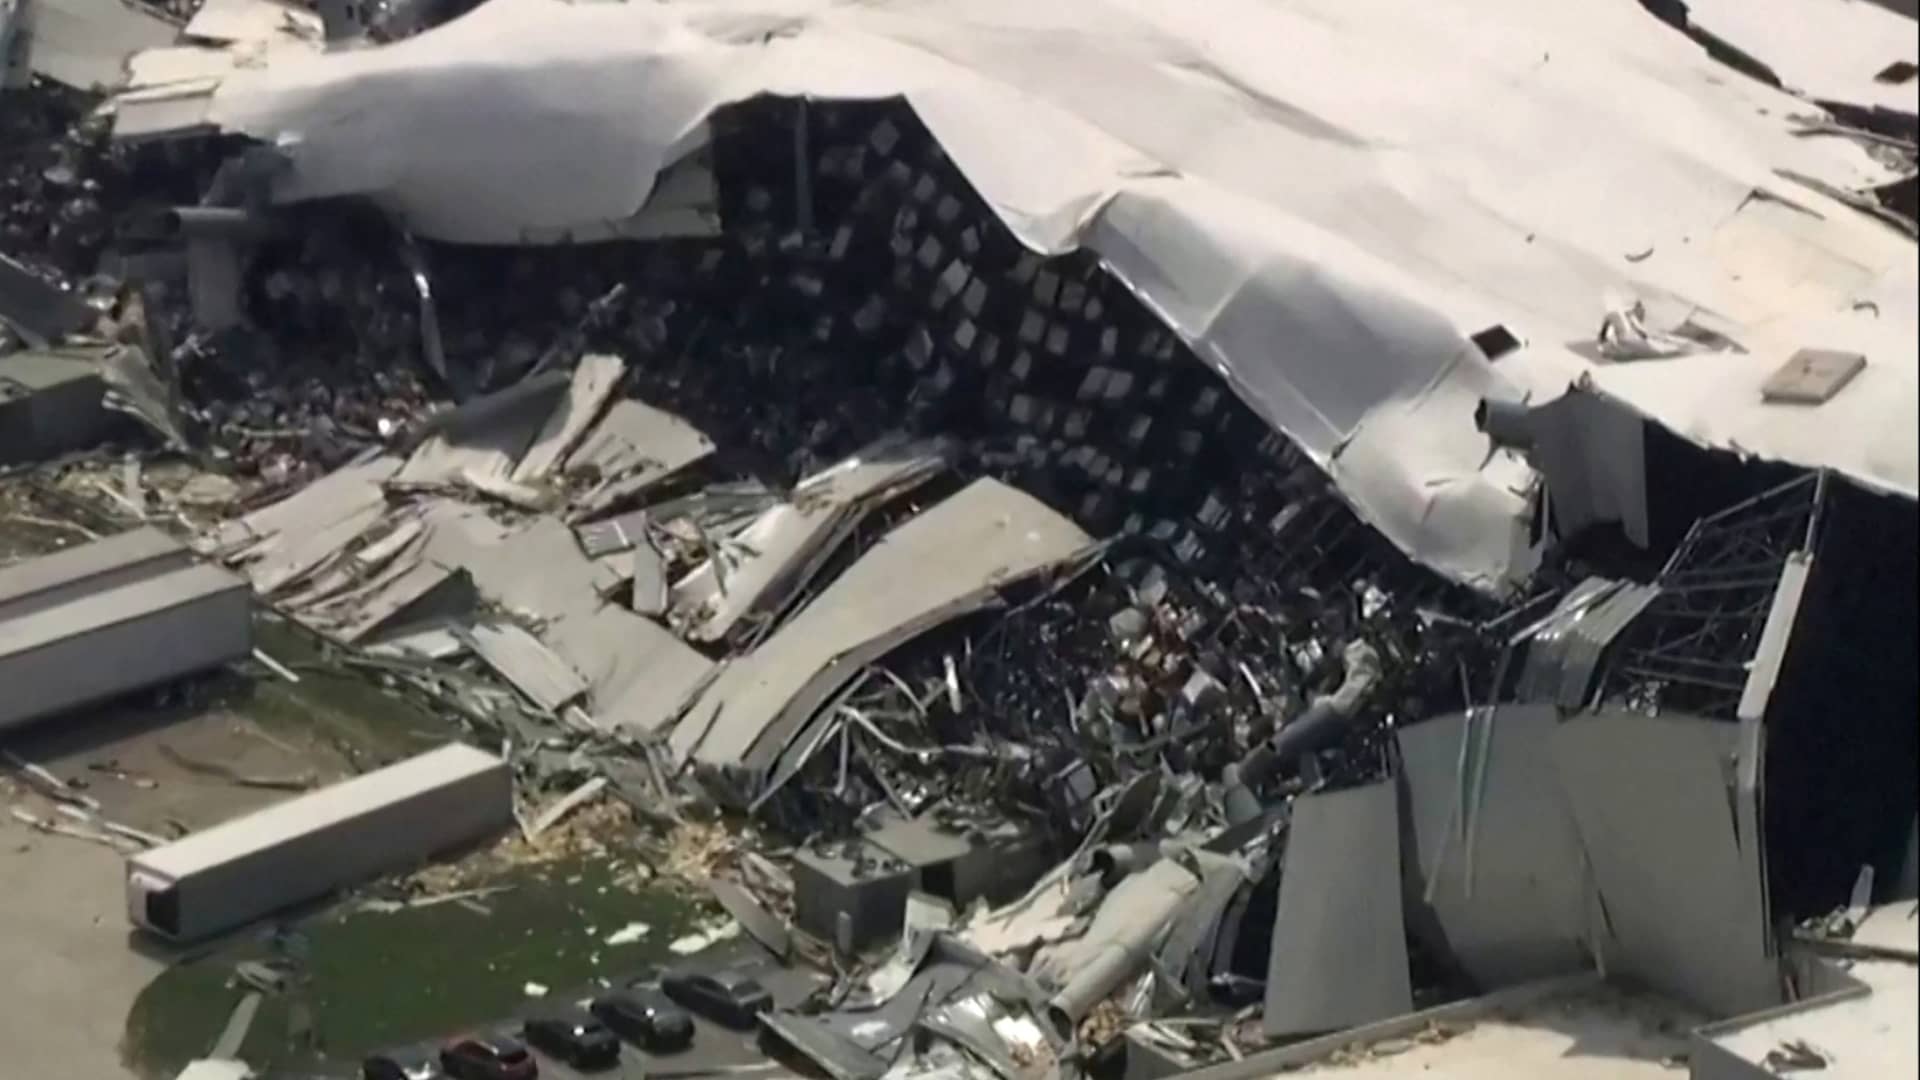 Pfizer limits distribution of some drugs from North Carolina plant damaged by tornado